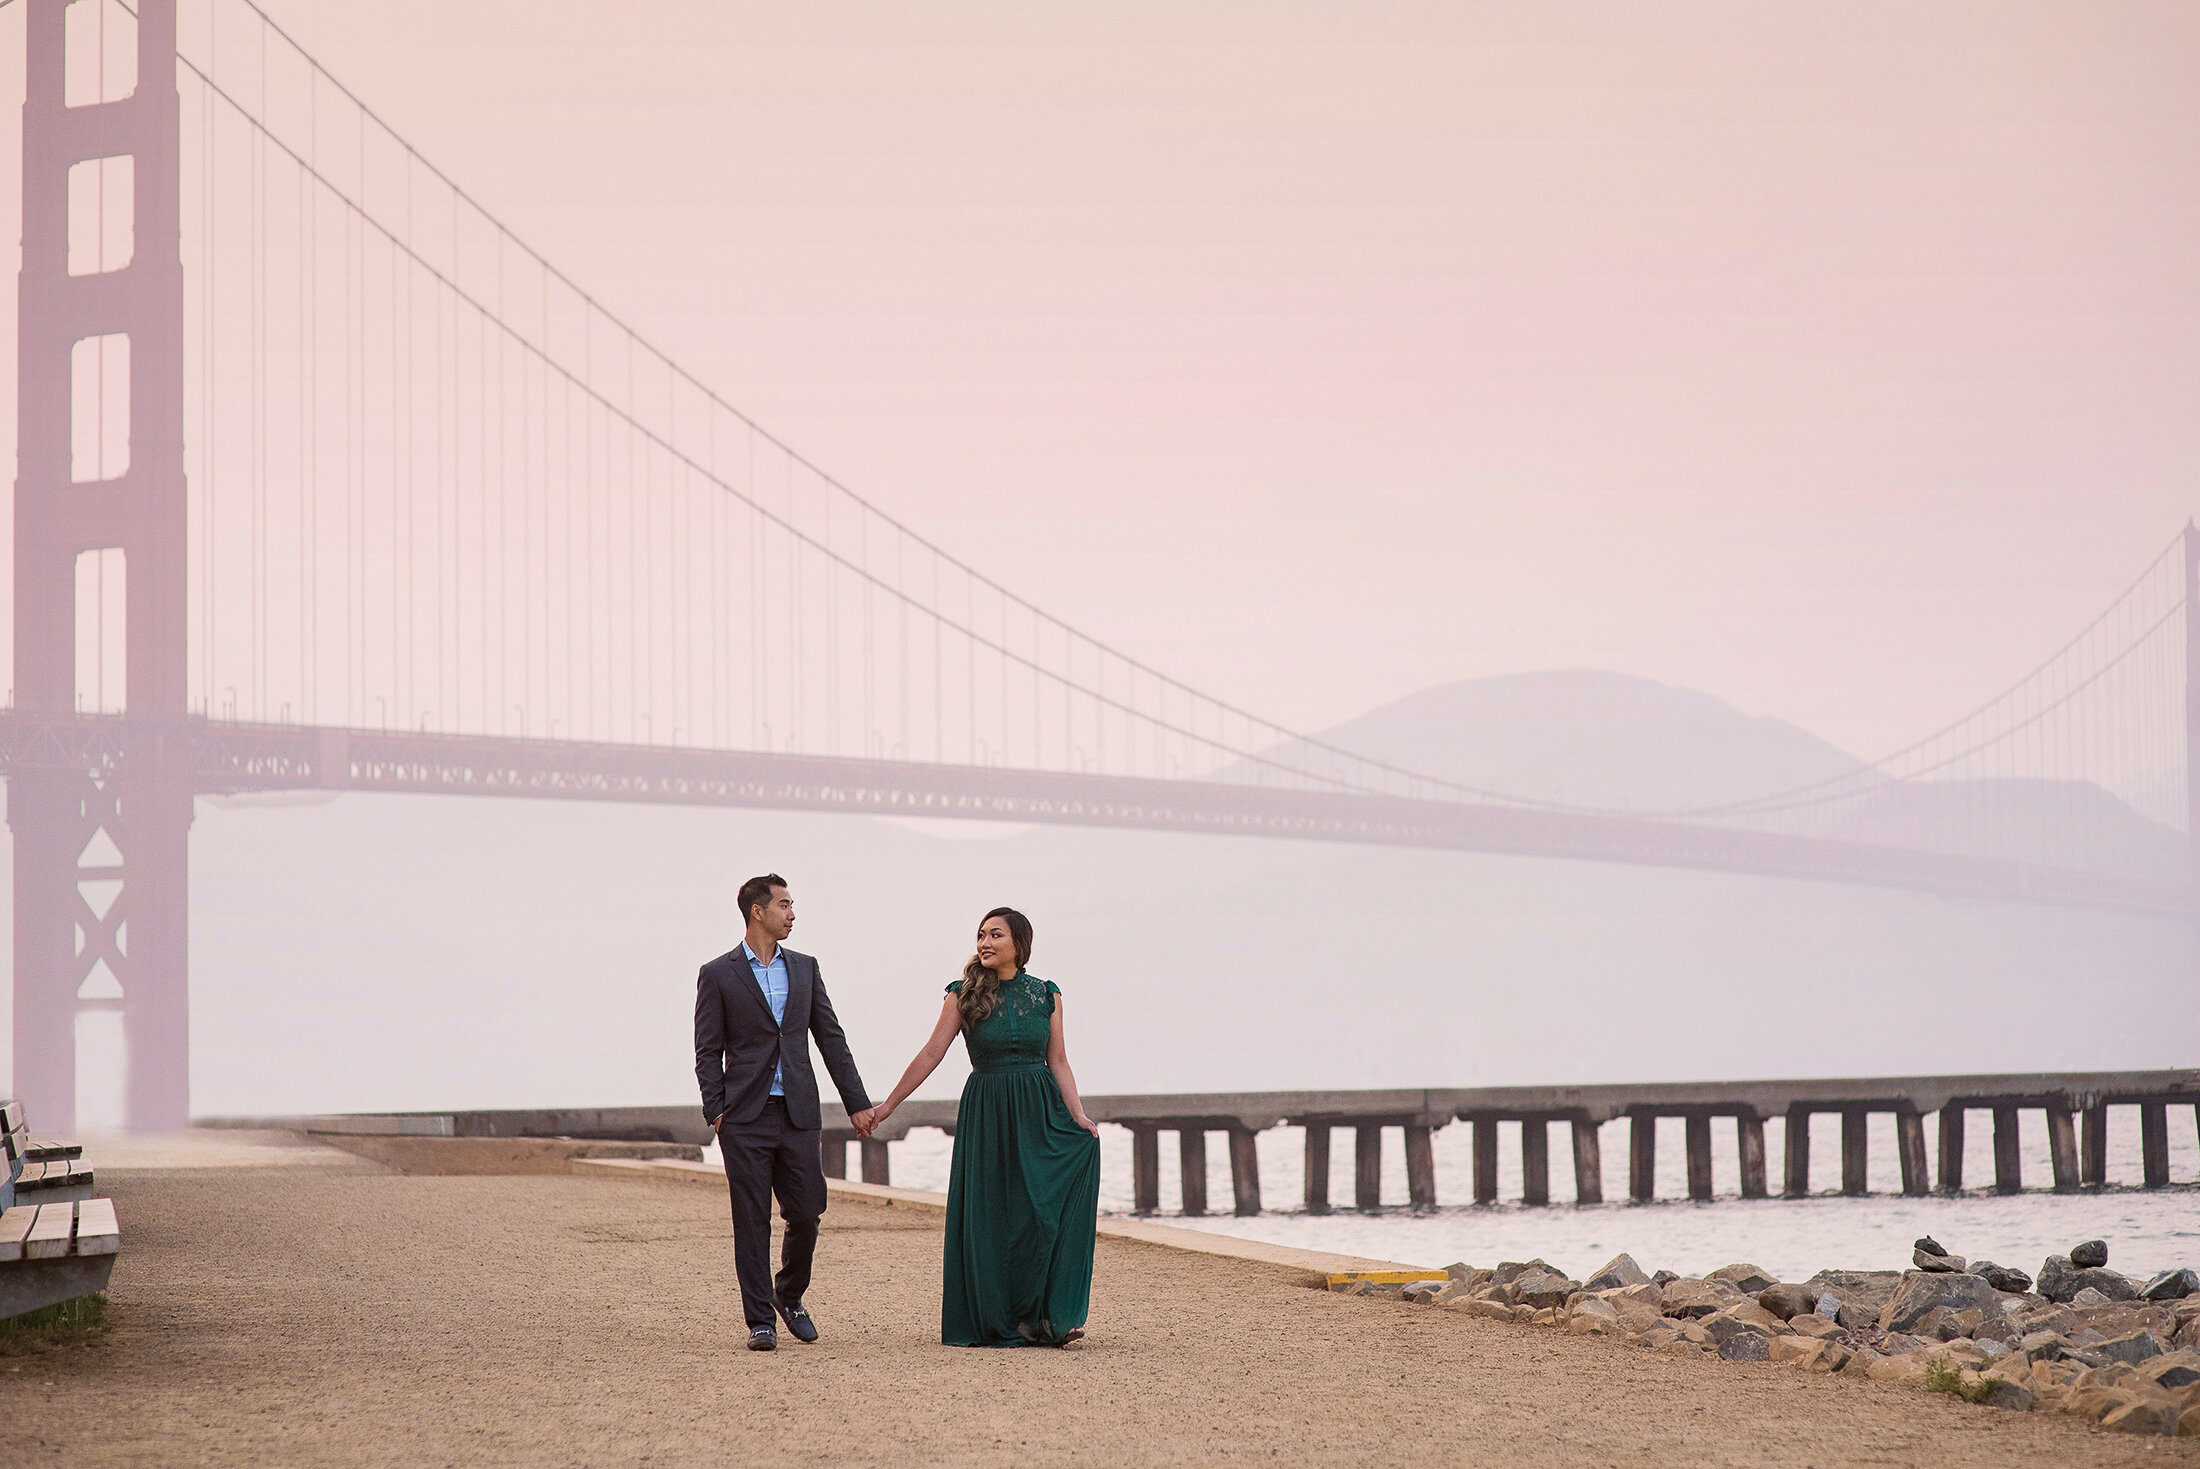  Engagement photography at Crissy Field in San Francisco with the Golden Gate Bridge as a background 